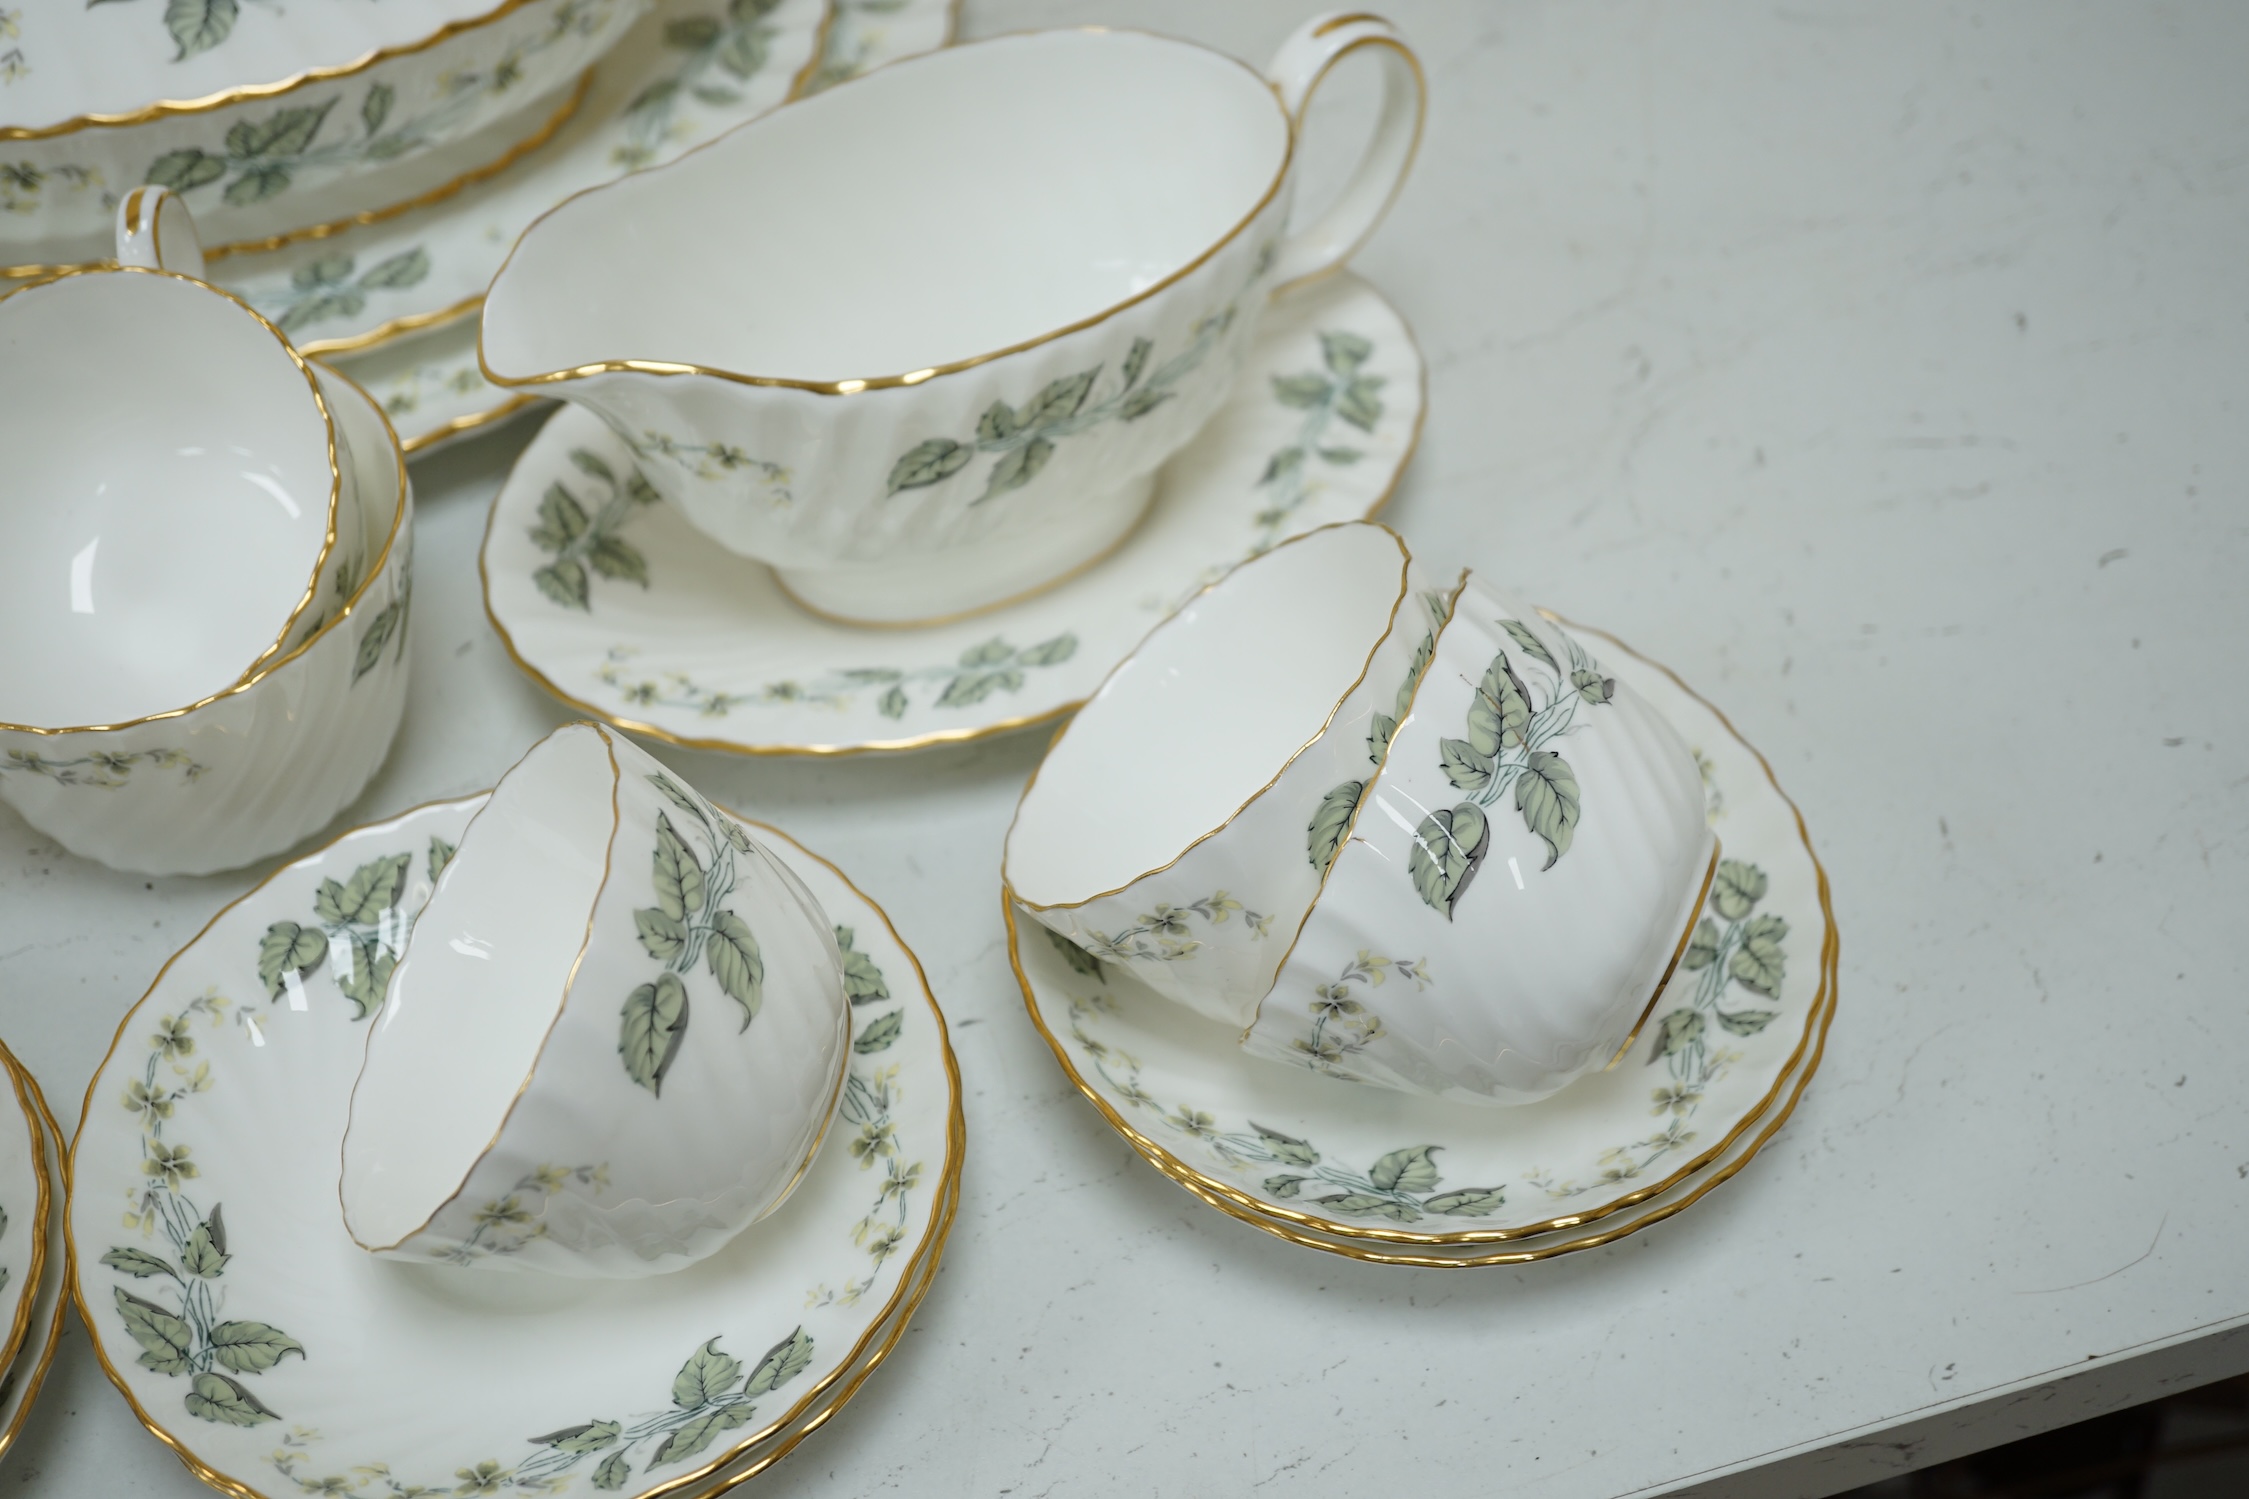 A Minton 'Greenwich pattern' bone china dinner and part tea service